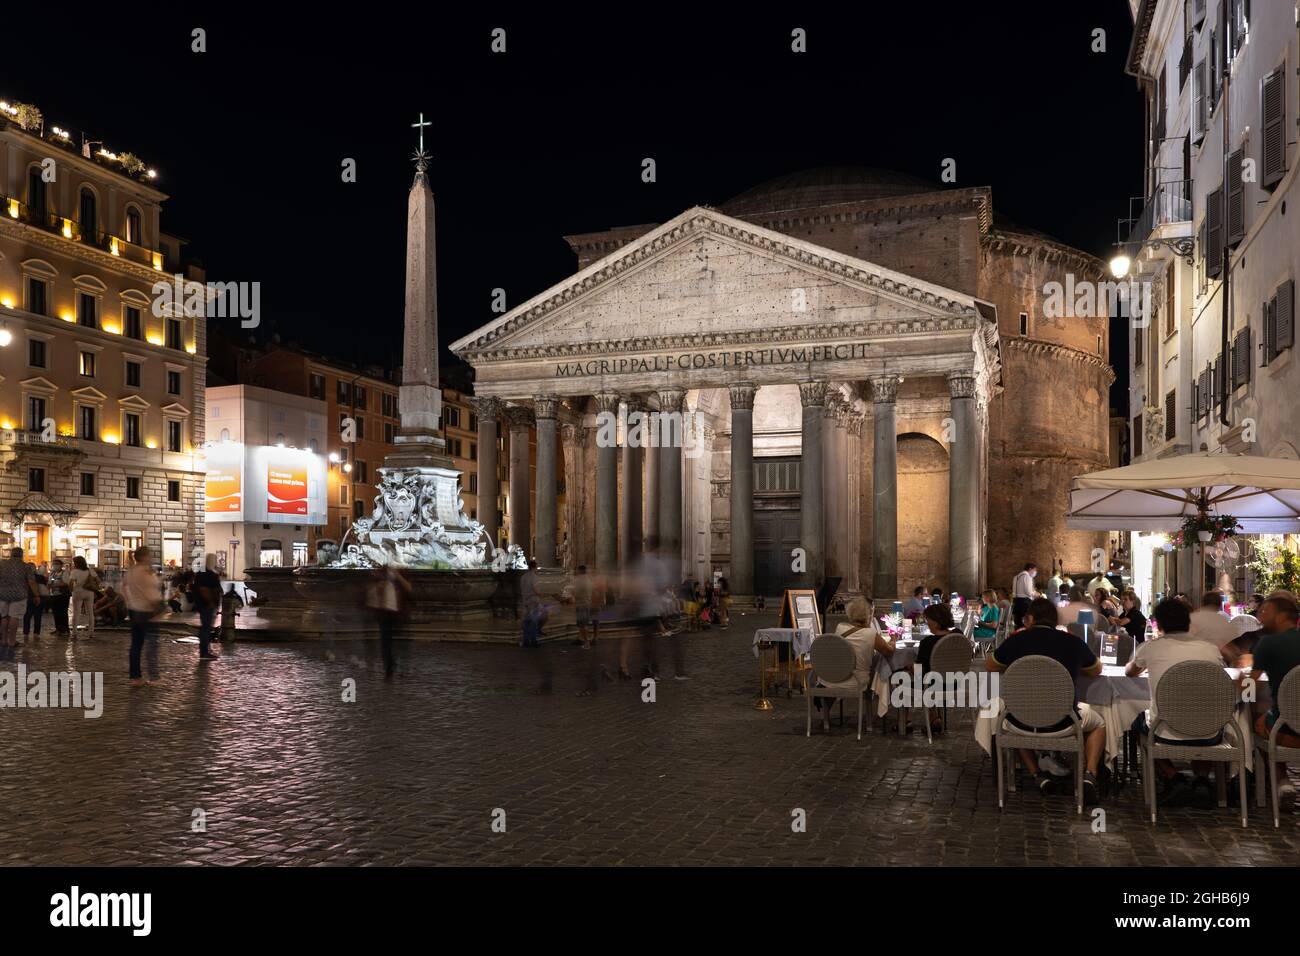 Rome, Italy - September 6, 2020: Pantheon at night, ancient Roman temple at Piazza della Rotonda square with people at restaurant tables, fountain and Stock Photo